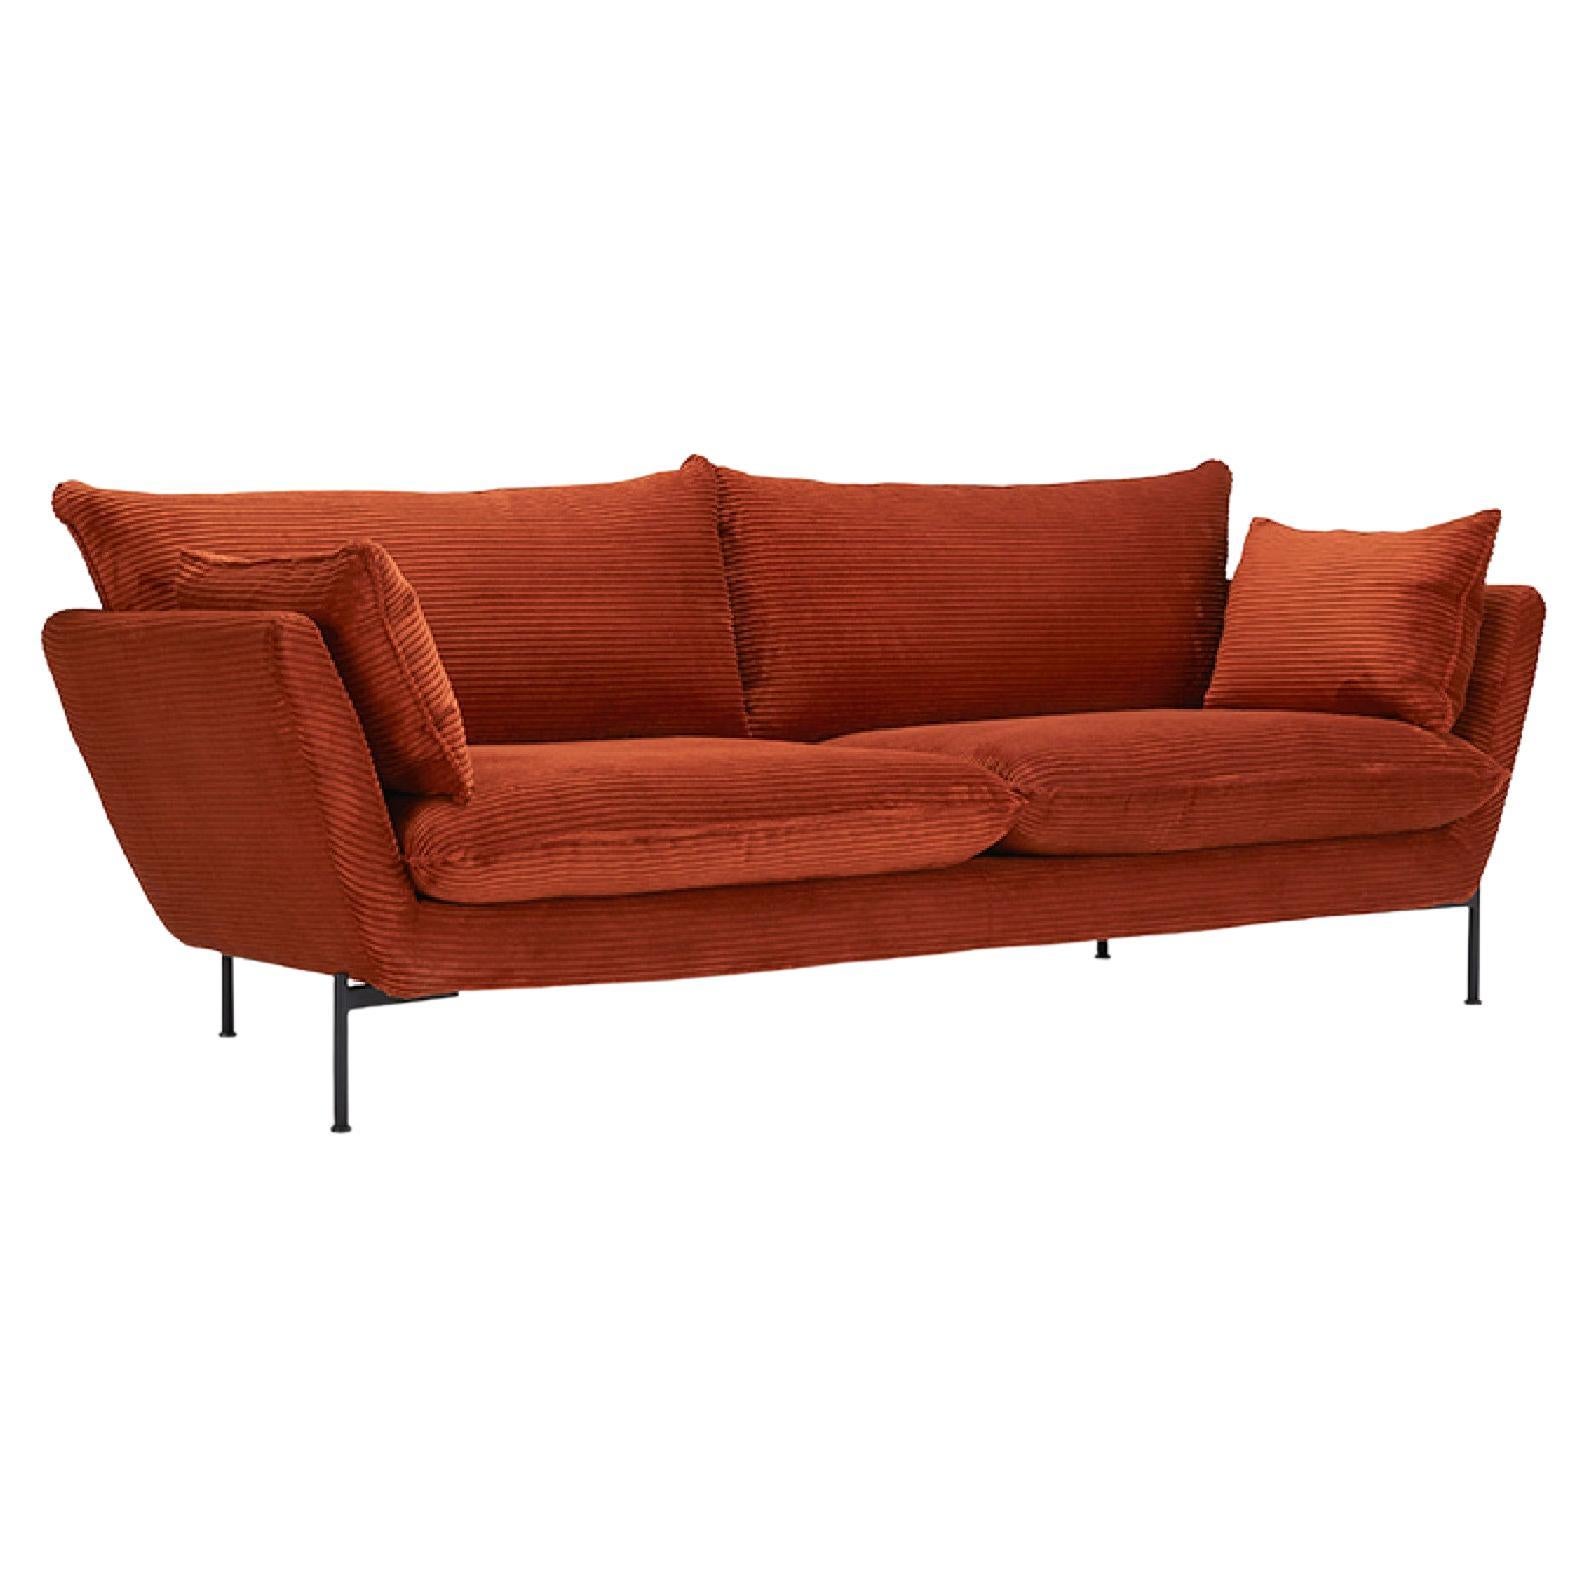 Hayche Nave Lux 2 Seater Sofa - Red, UK, Made to Order For Sale